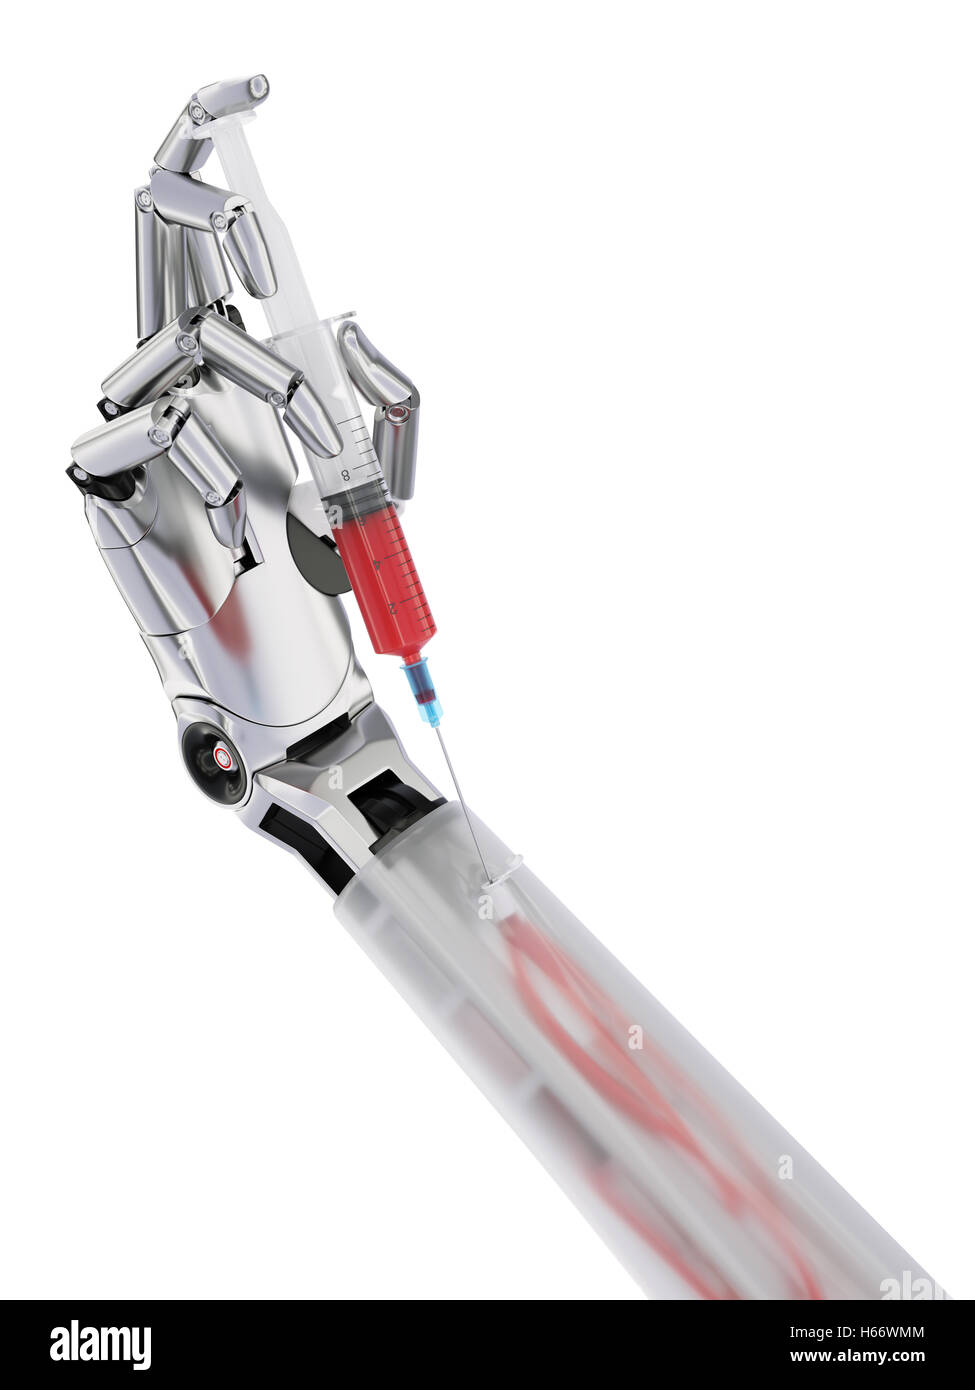 Robot Blood Revival Injection Concept 3d Illustration Isolated on White Stock Photo